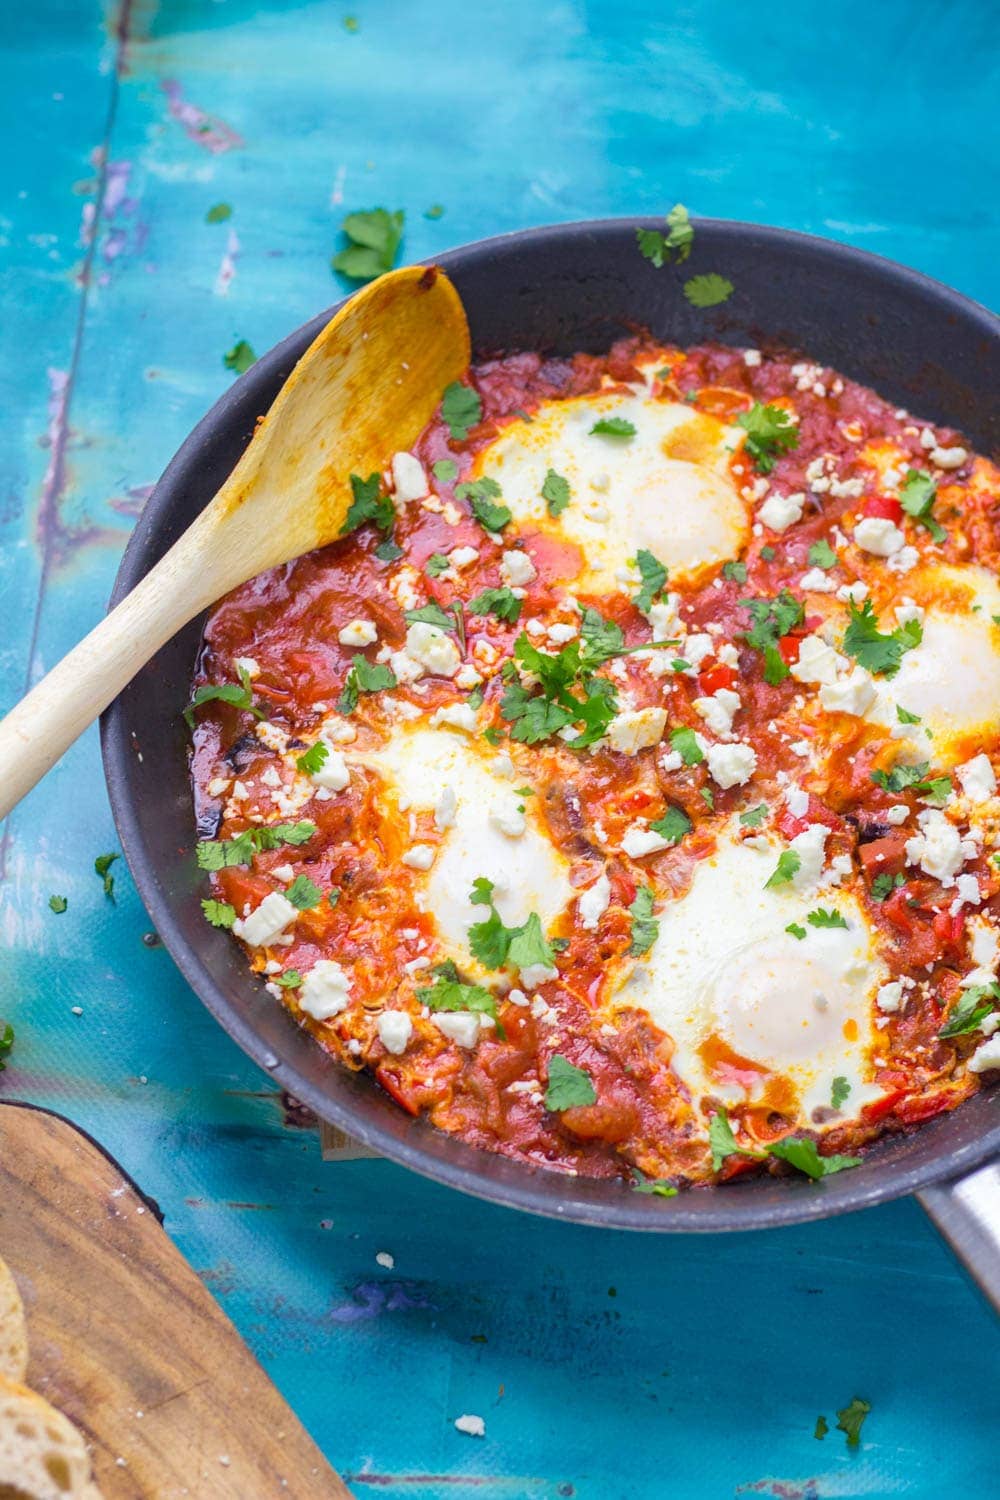 This chorizo shakshuka is full of smoky flavour from the chorizo and smoked paprika. Serve with crusty bread for those runny yolks and a dollop of yoghurt.